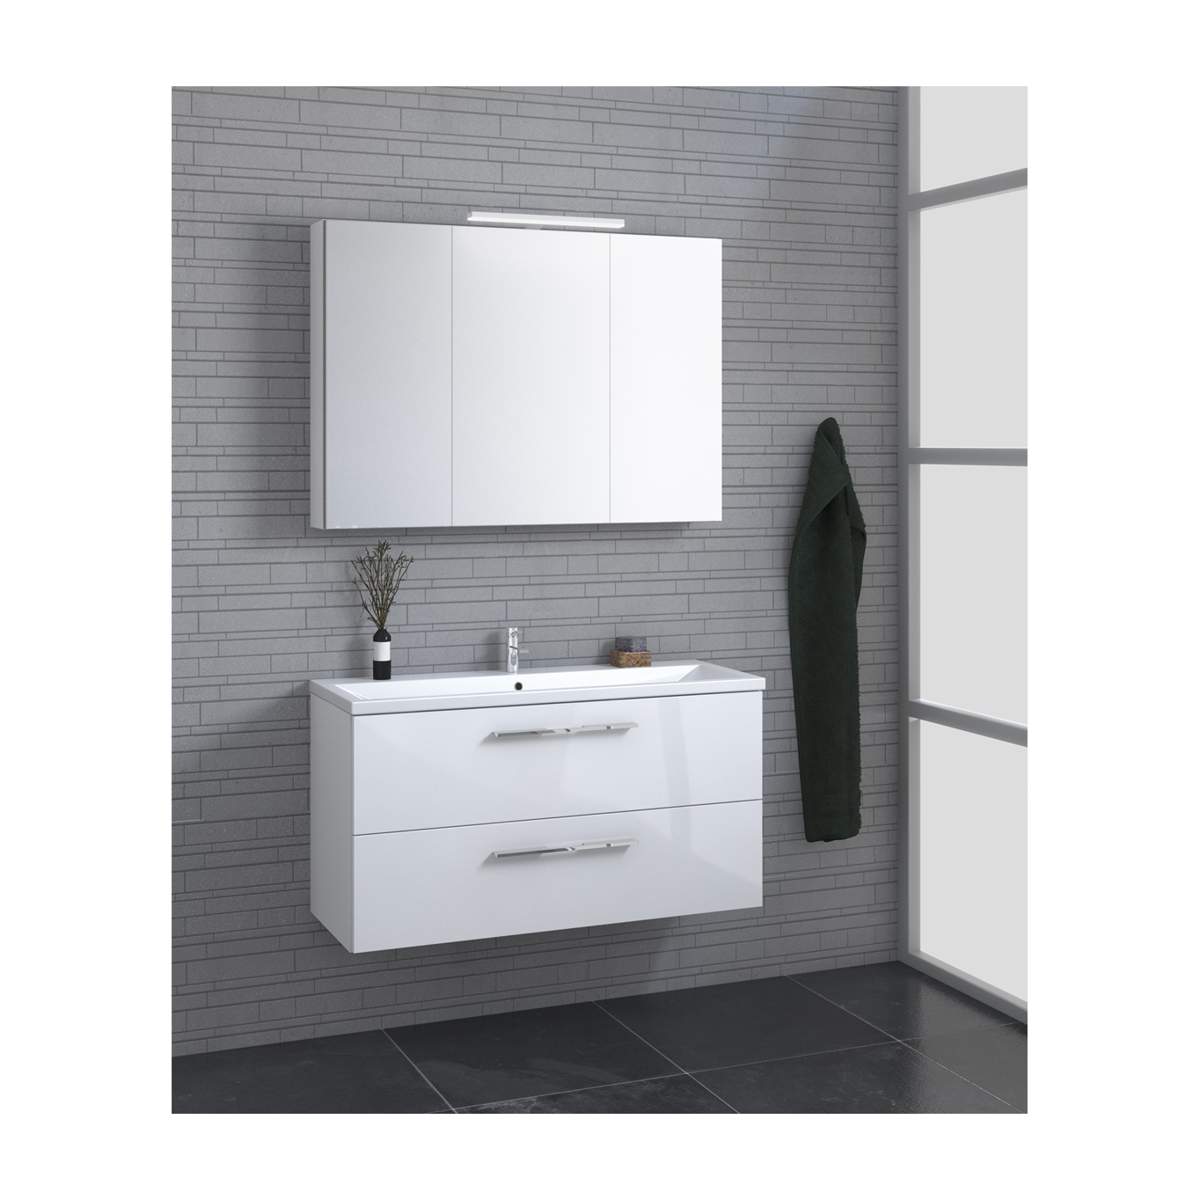 JTP Pace Units 800mm Wall Mounted Unit with Drawers and Basin in White (PWM803W + P800BS)